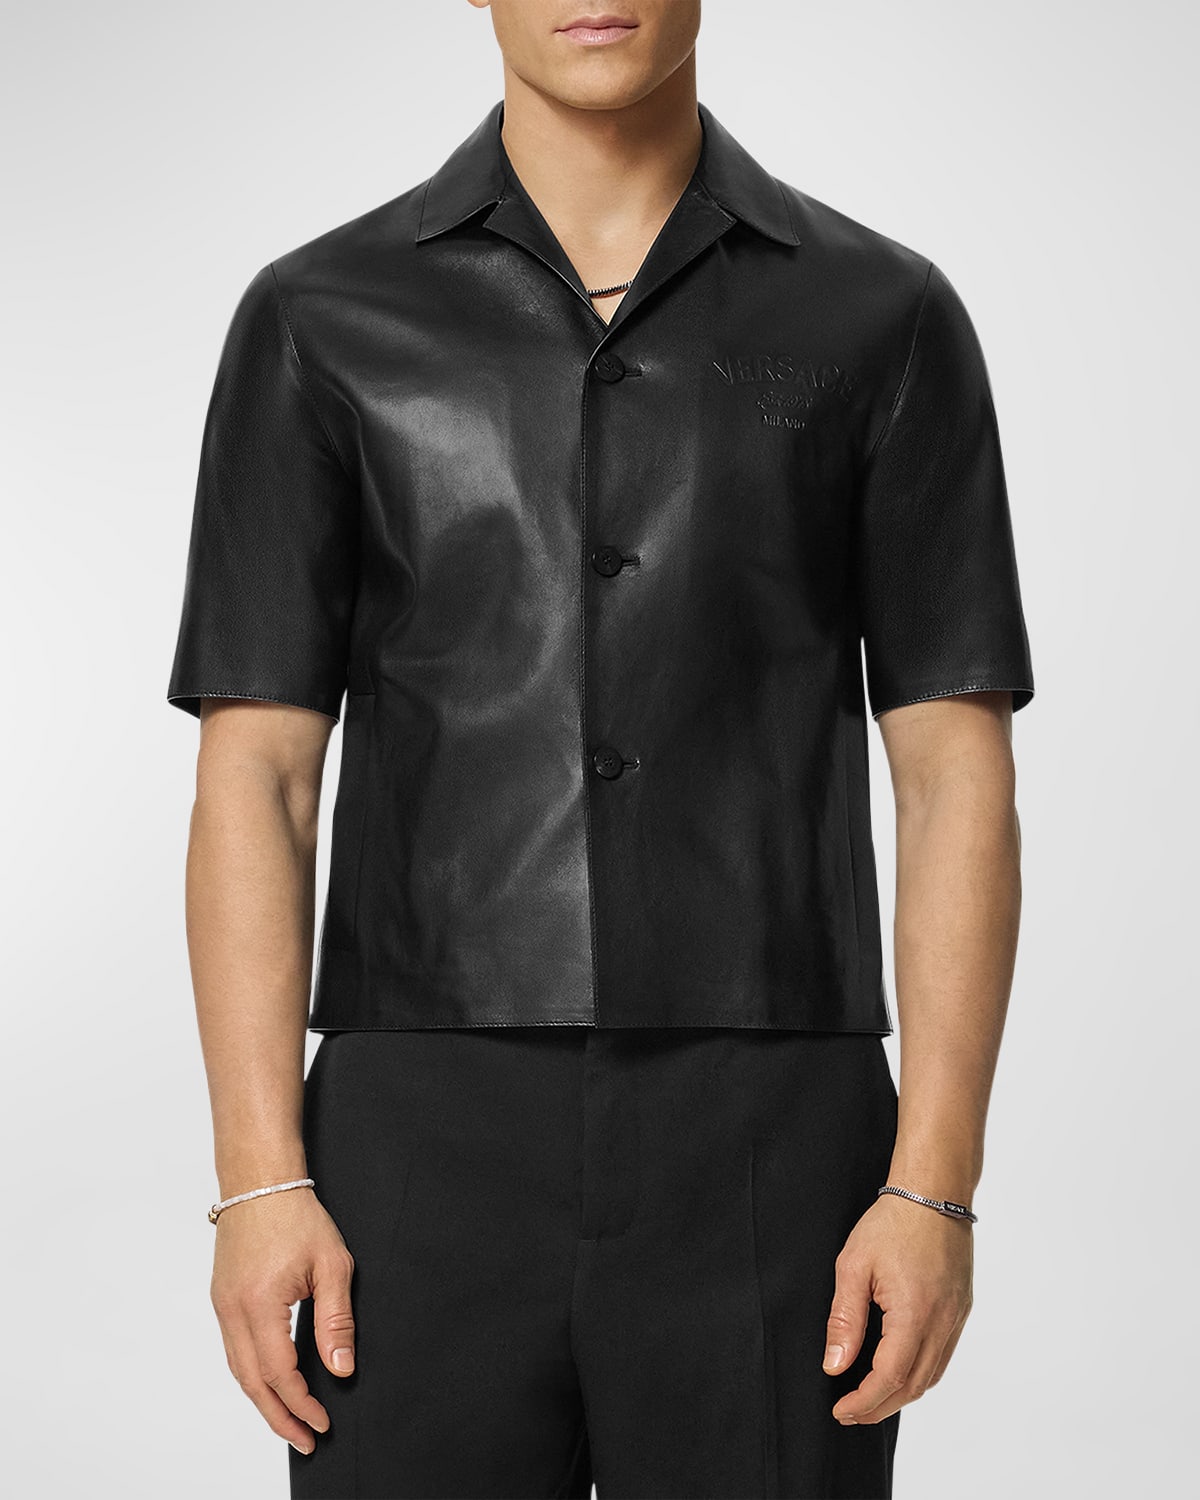 Men's Smooth Leather Camp Shirt